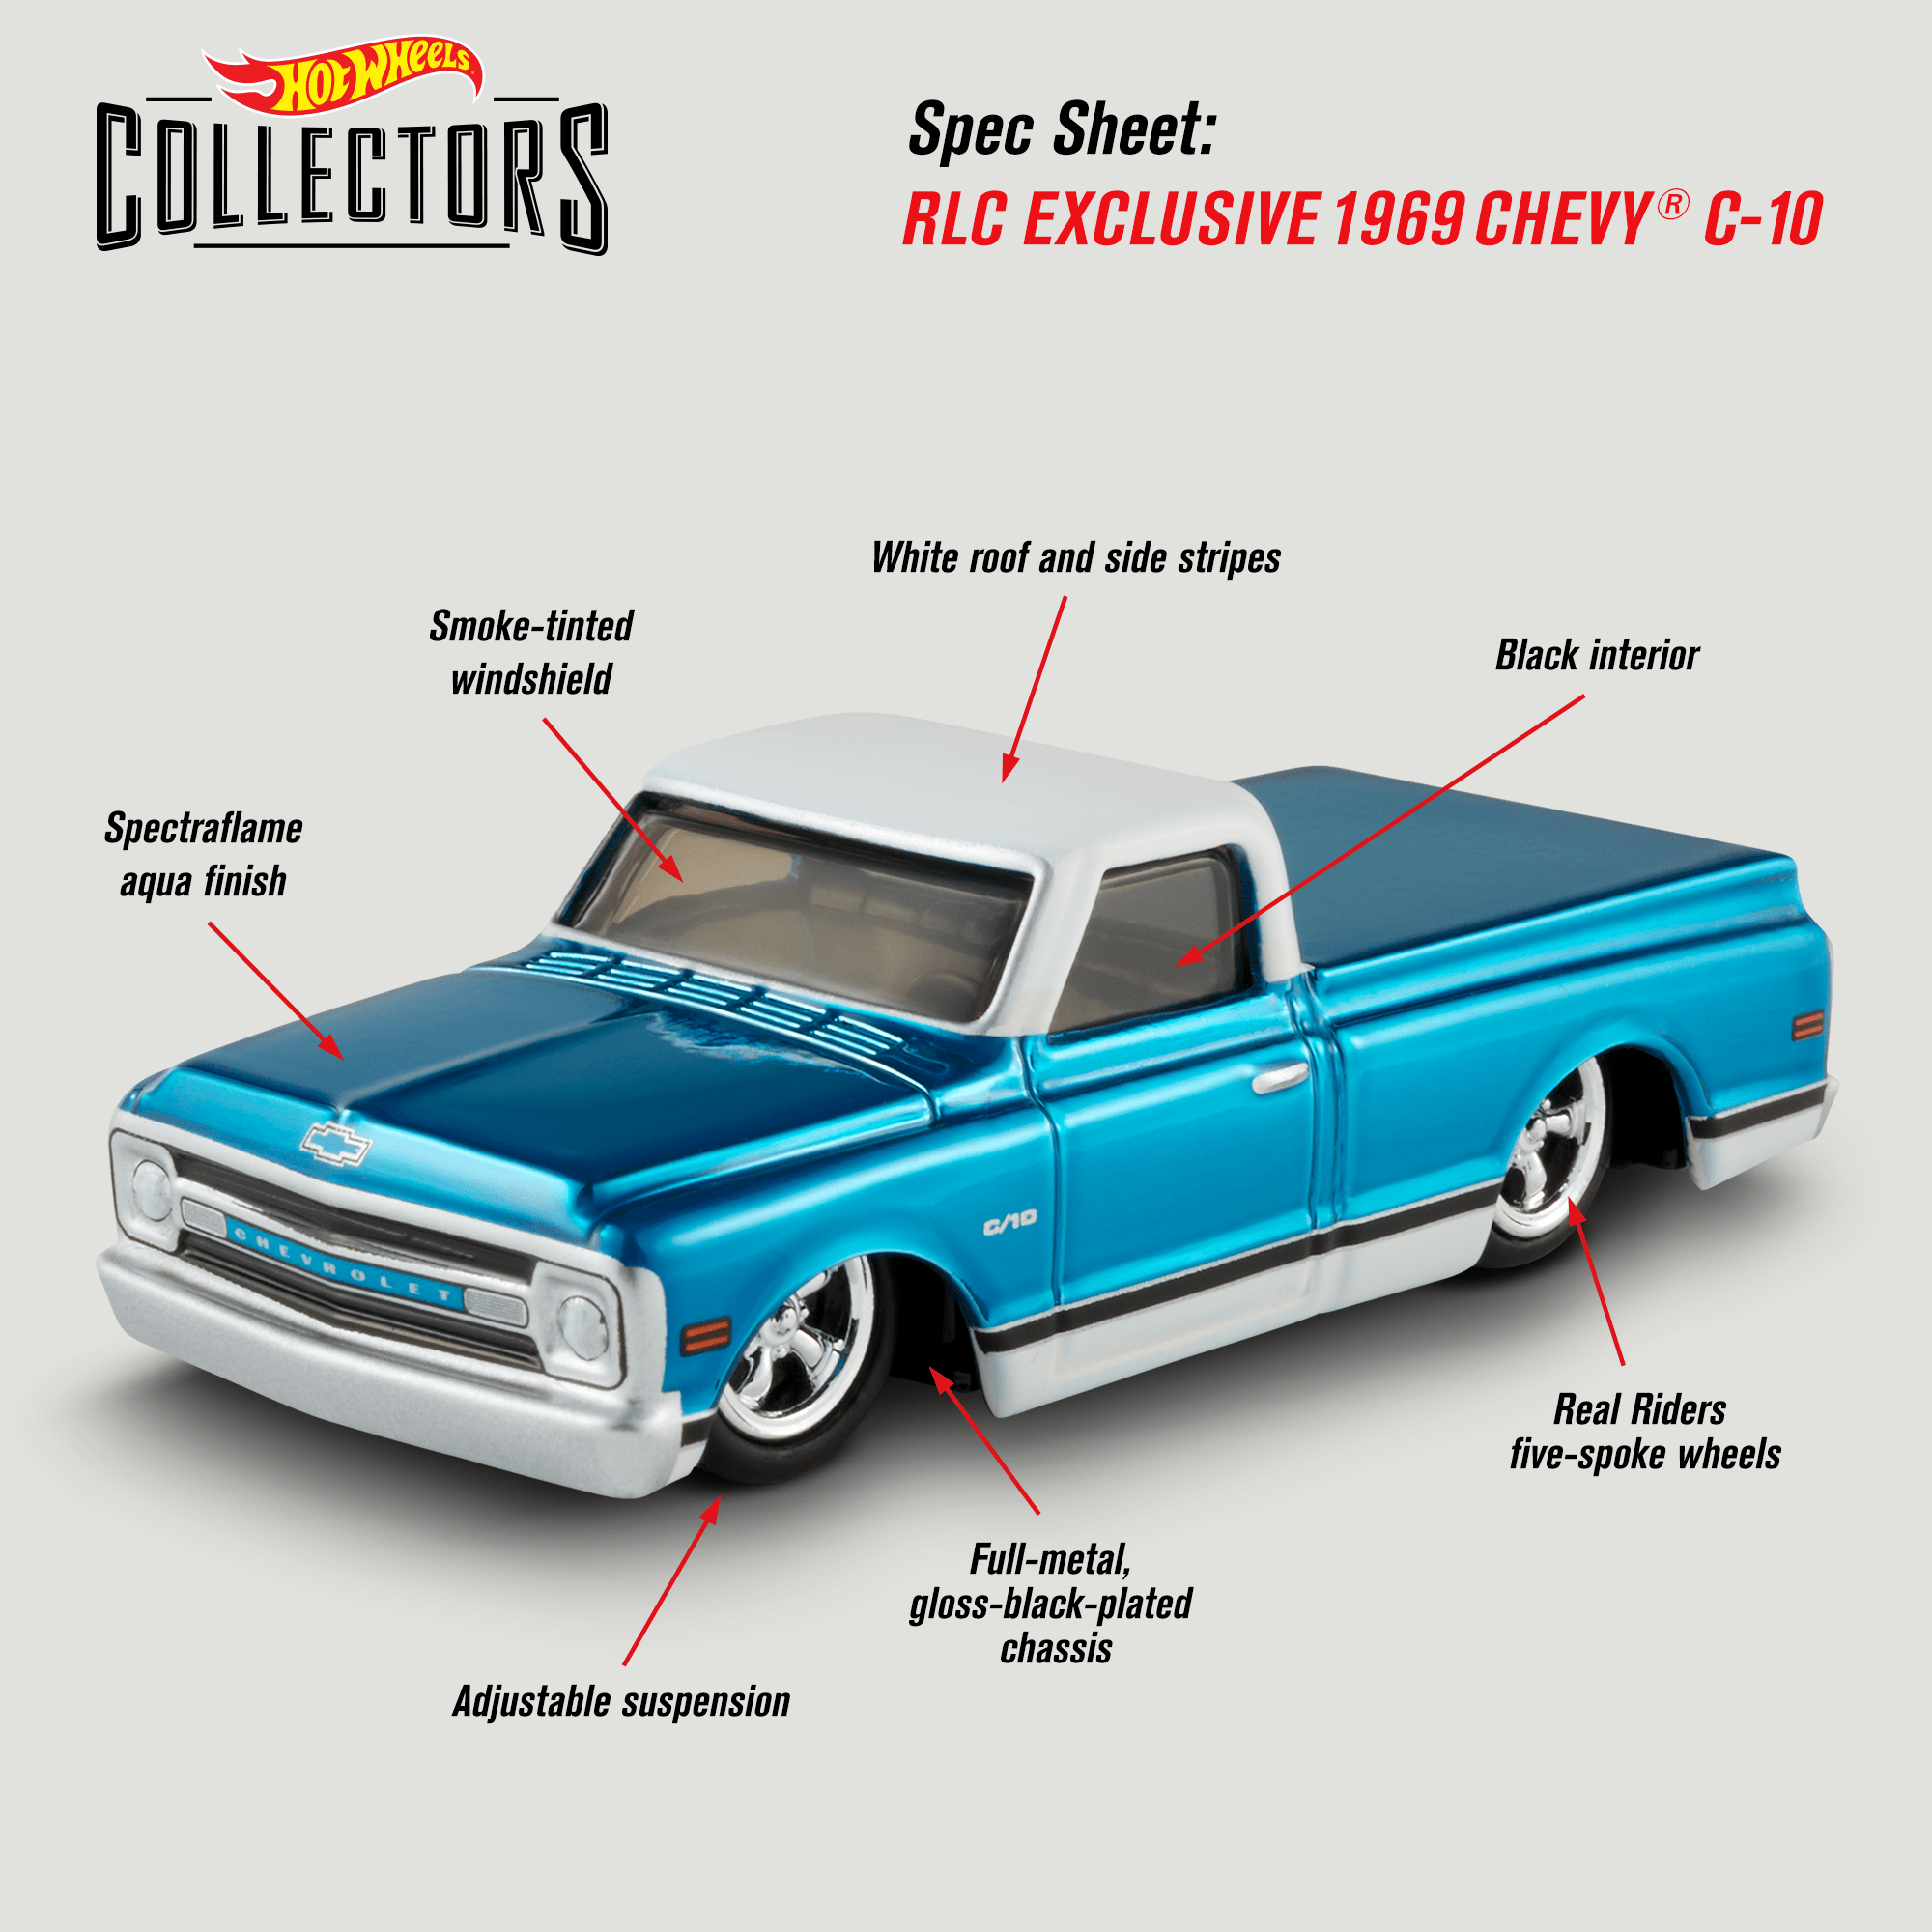 RLC Exclusive 1969 Chevy C-10